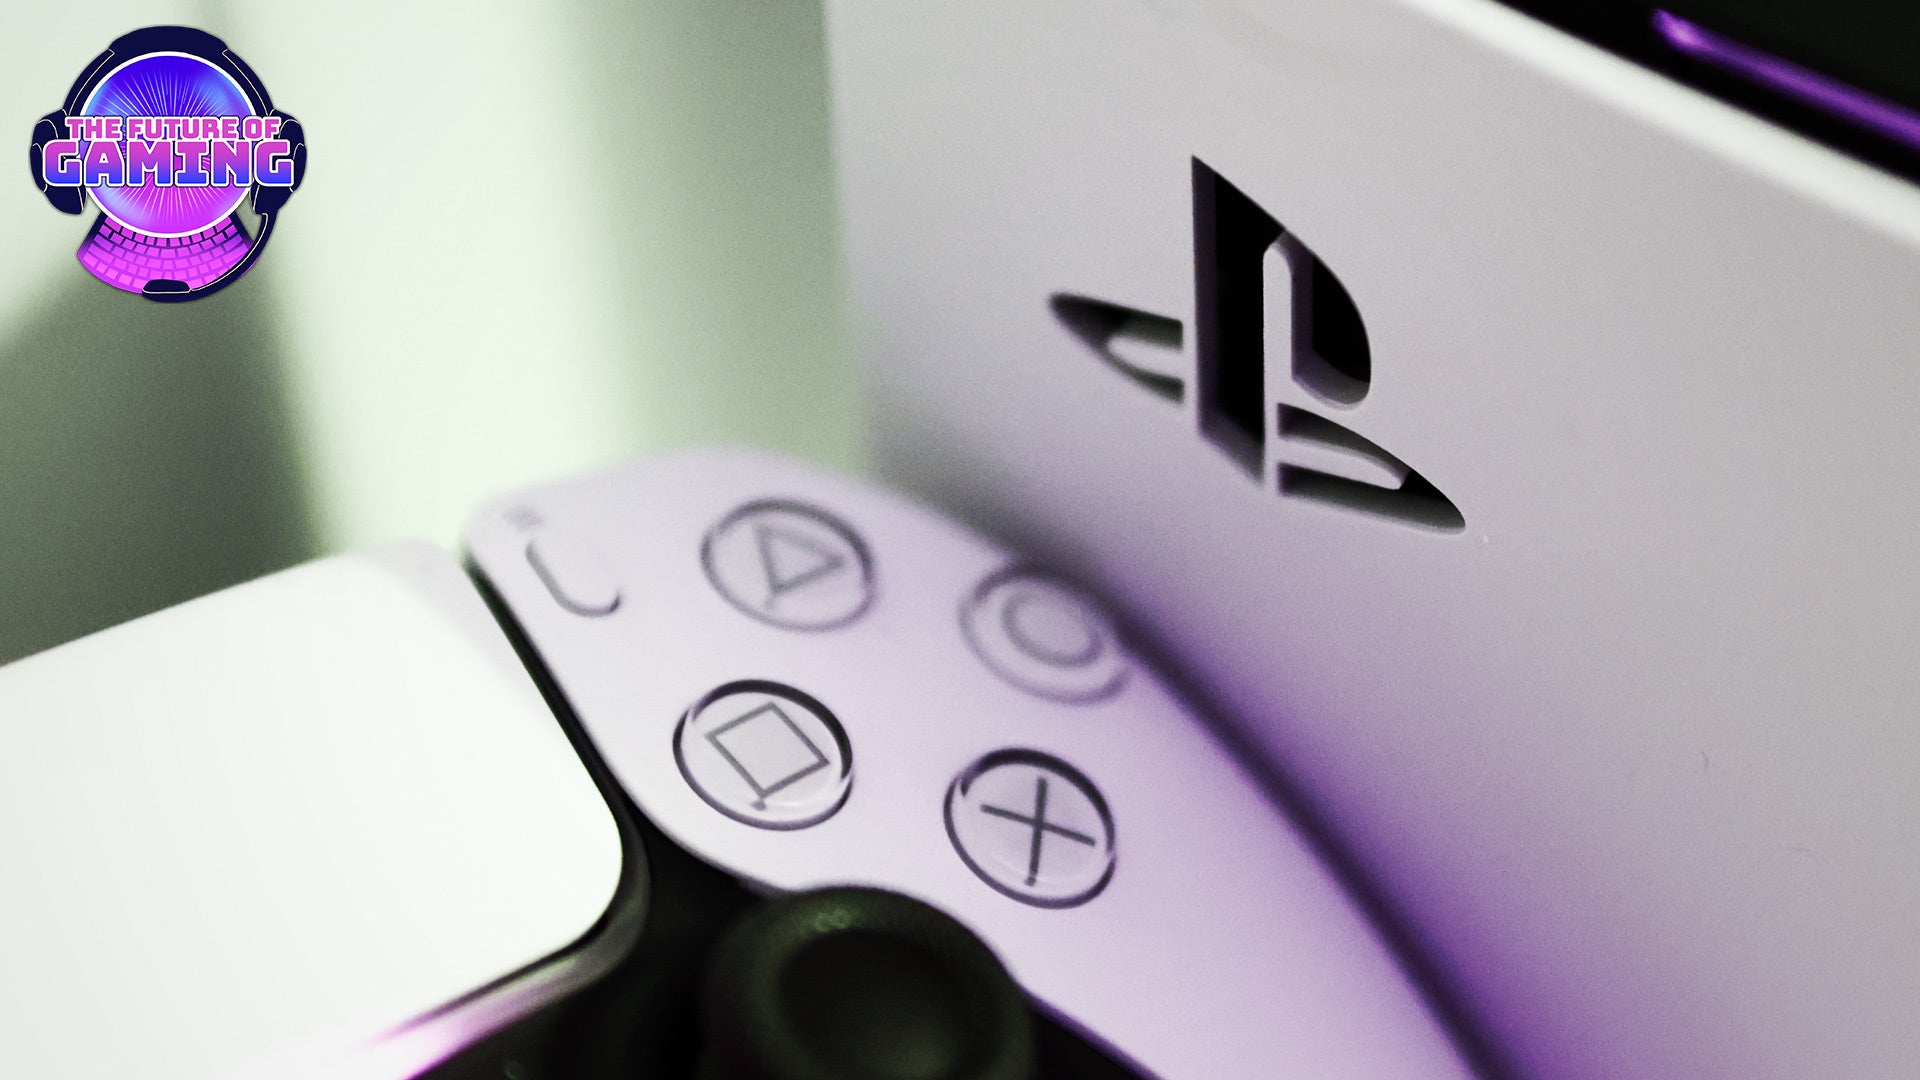 Alleged Specs for the PS5 Pro Suggest an Upgrade with 4K Ray Tracing Power